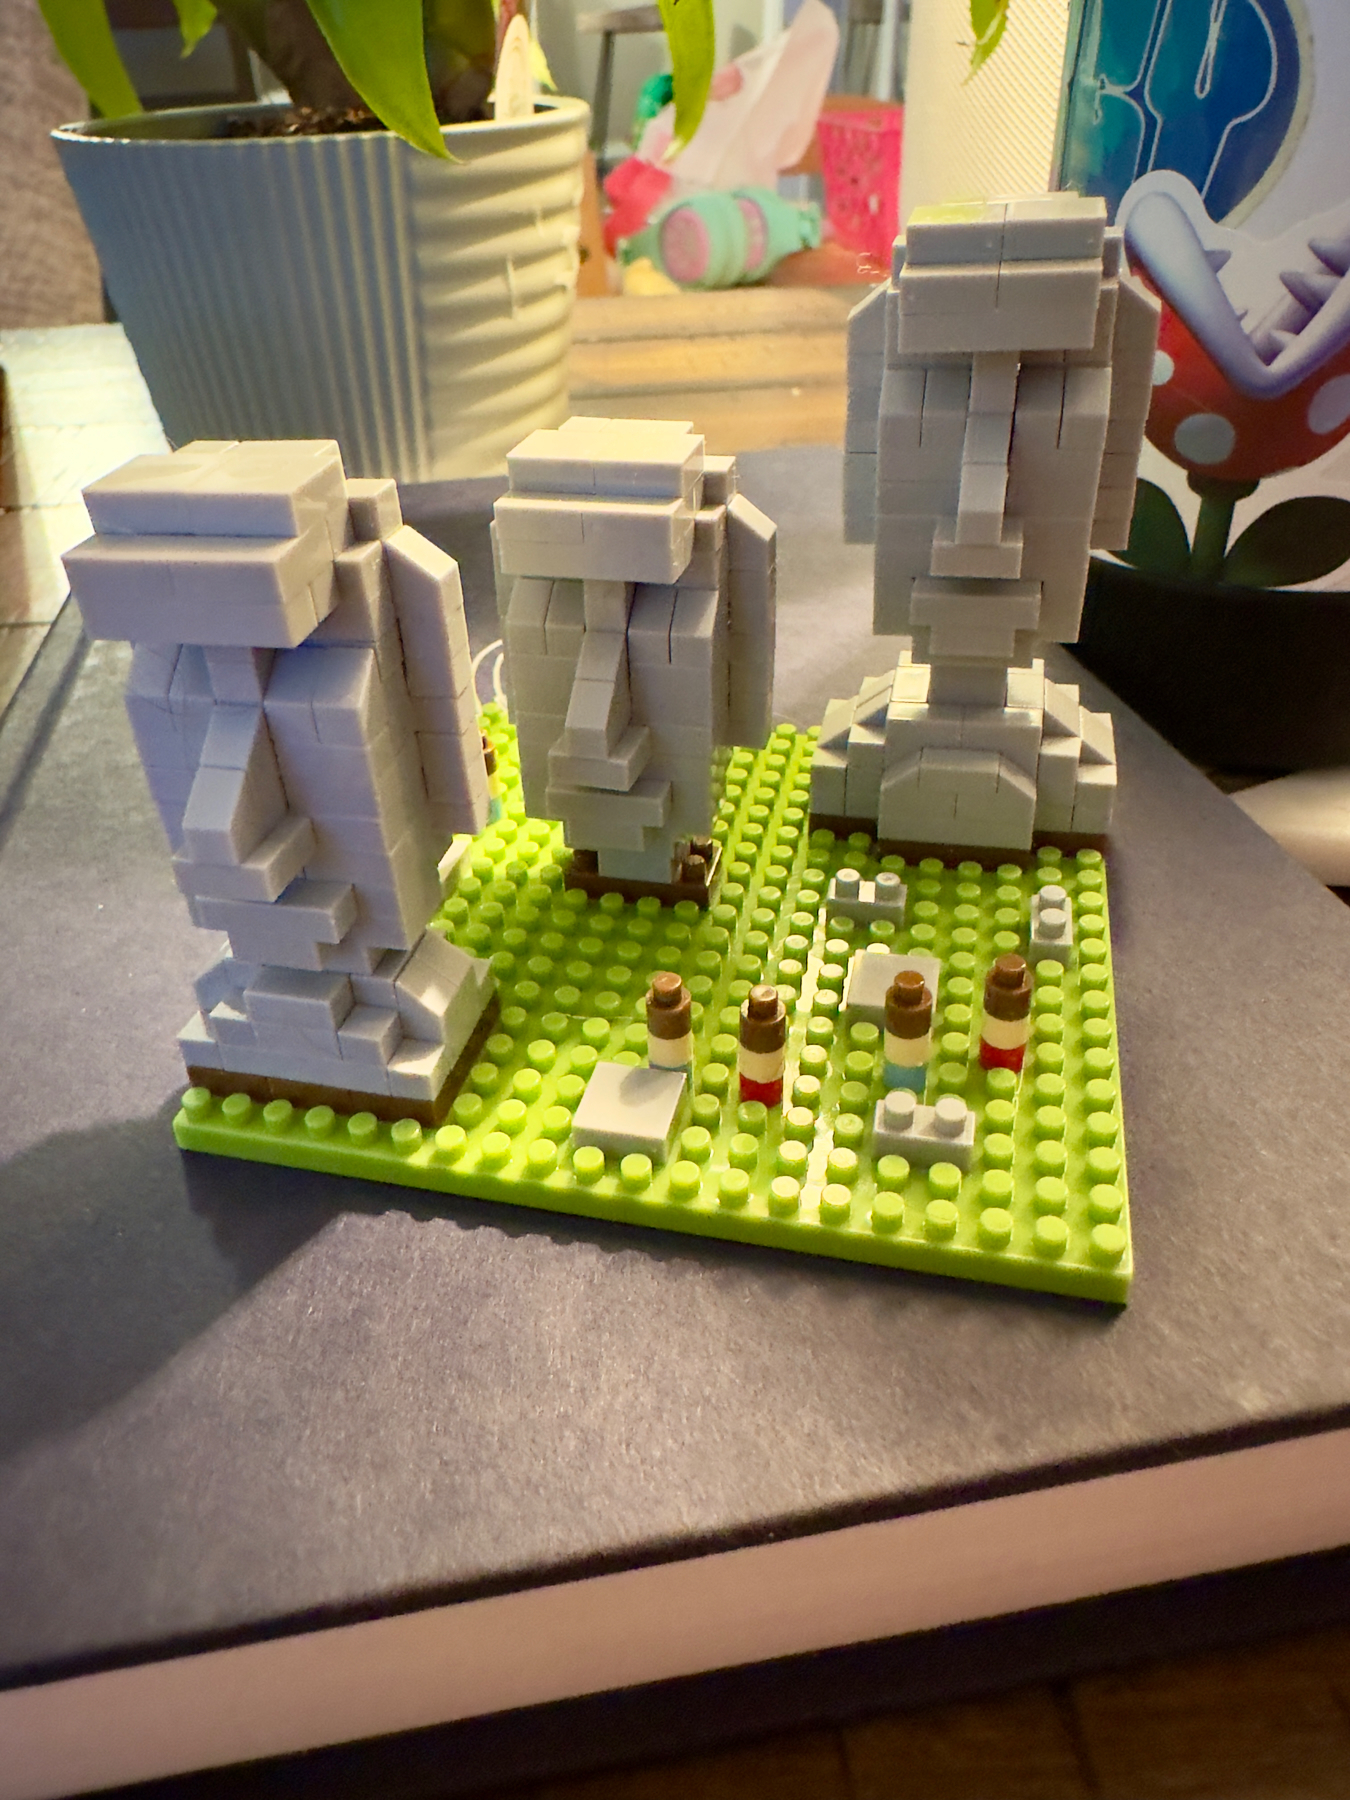 A LEGO model depicting three Moai statues (like those on Easter Island) on a green baseplate, surrounded by other miscellaneous LEGO pieces. In the background, there is a potted plant and other indistinct household items.